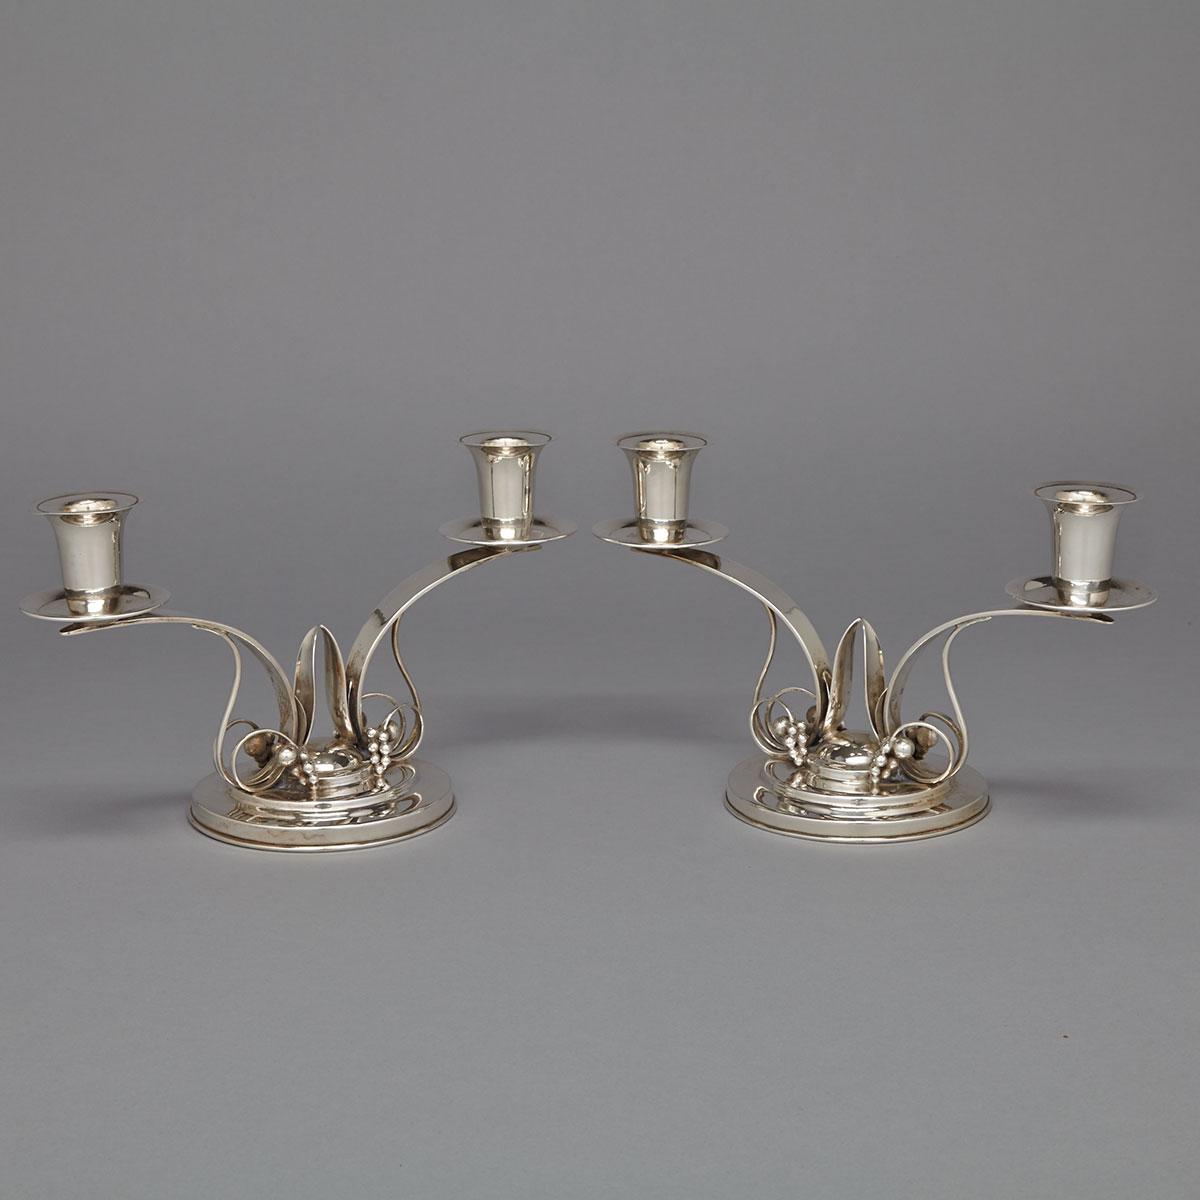 Pair of Canadian Silver Two-Light Candelabra, Carl Poul Petersen, Montreal, Que., mid-20th century